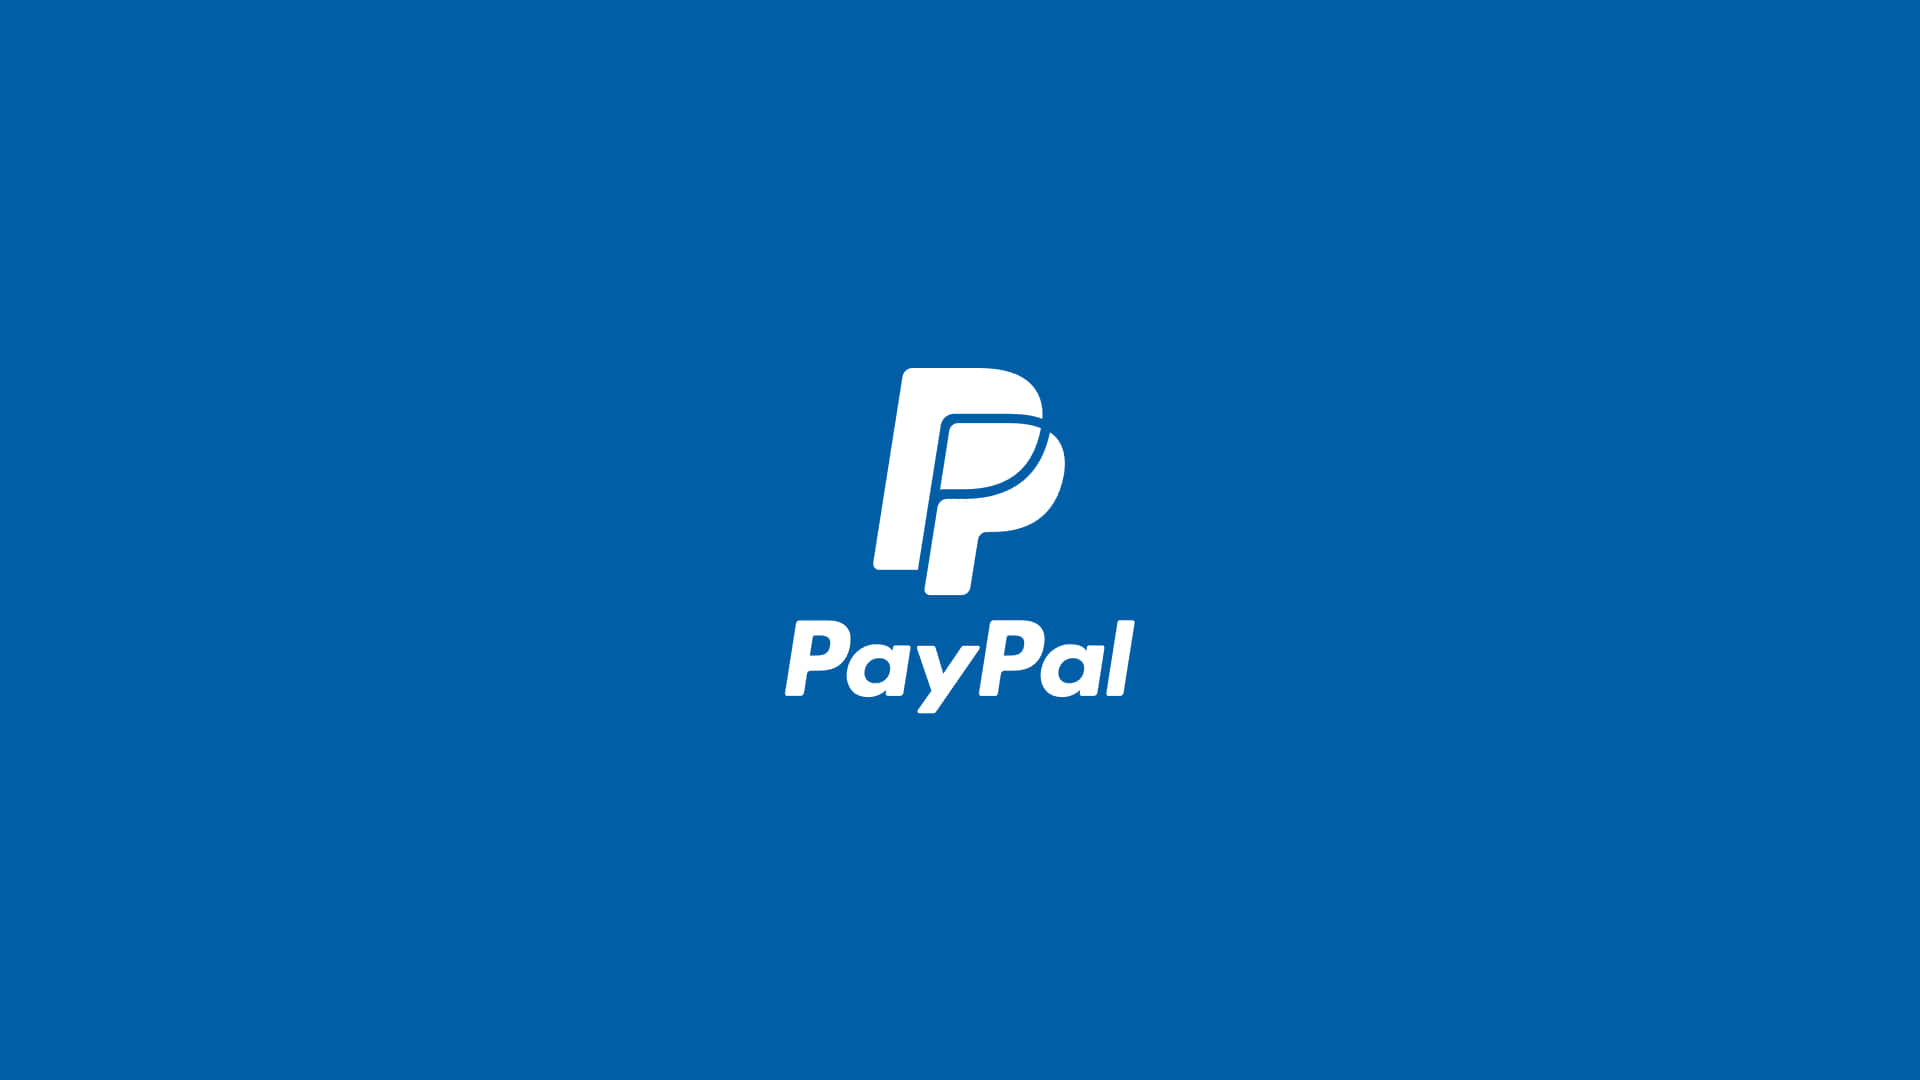 Paypal Logo On A Blue Background